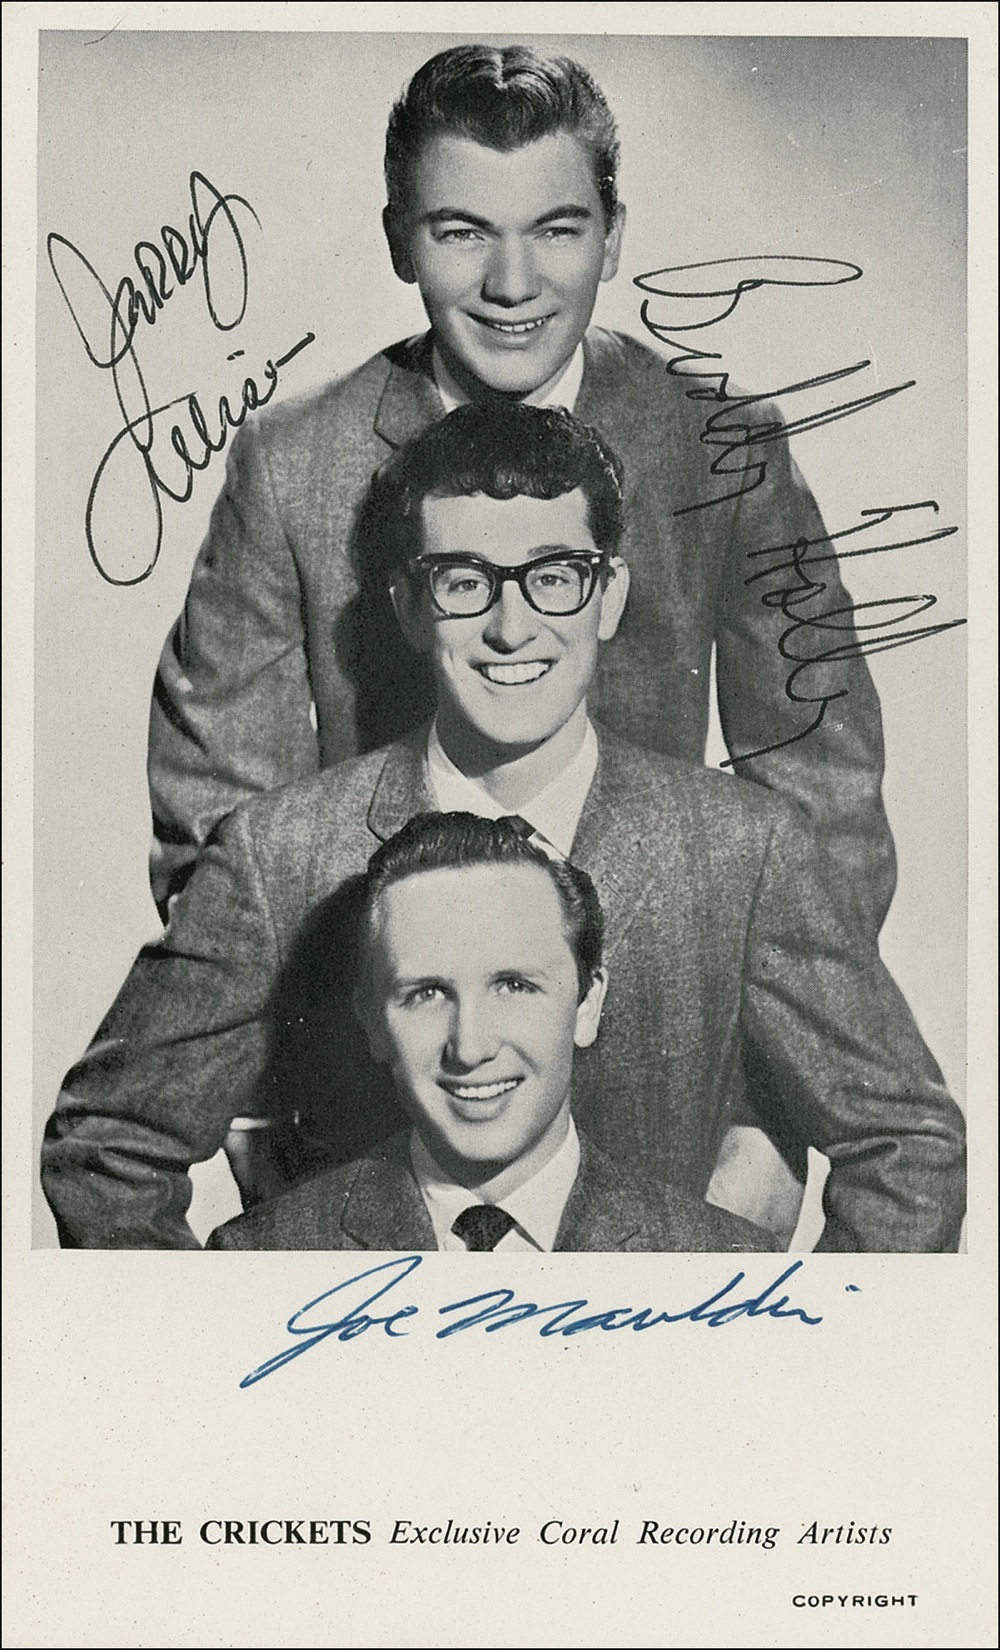 Lot #764 Buddy Holly and the Crickets